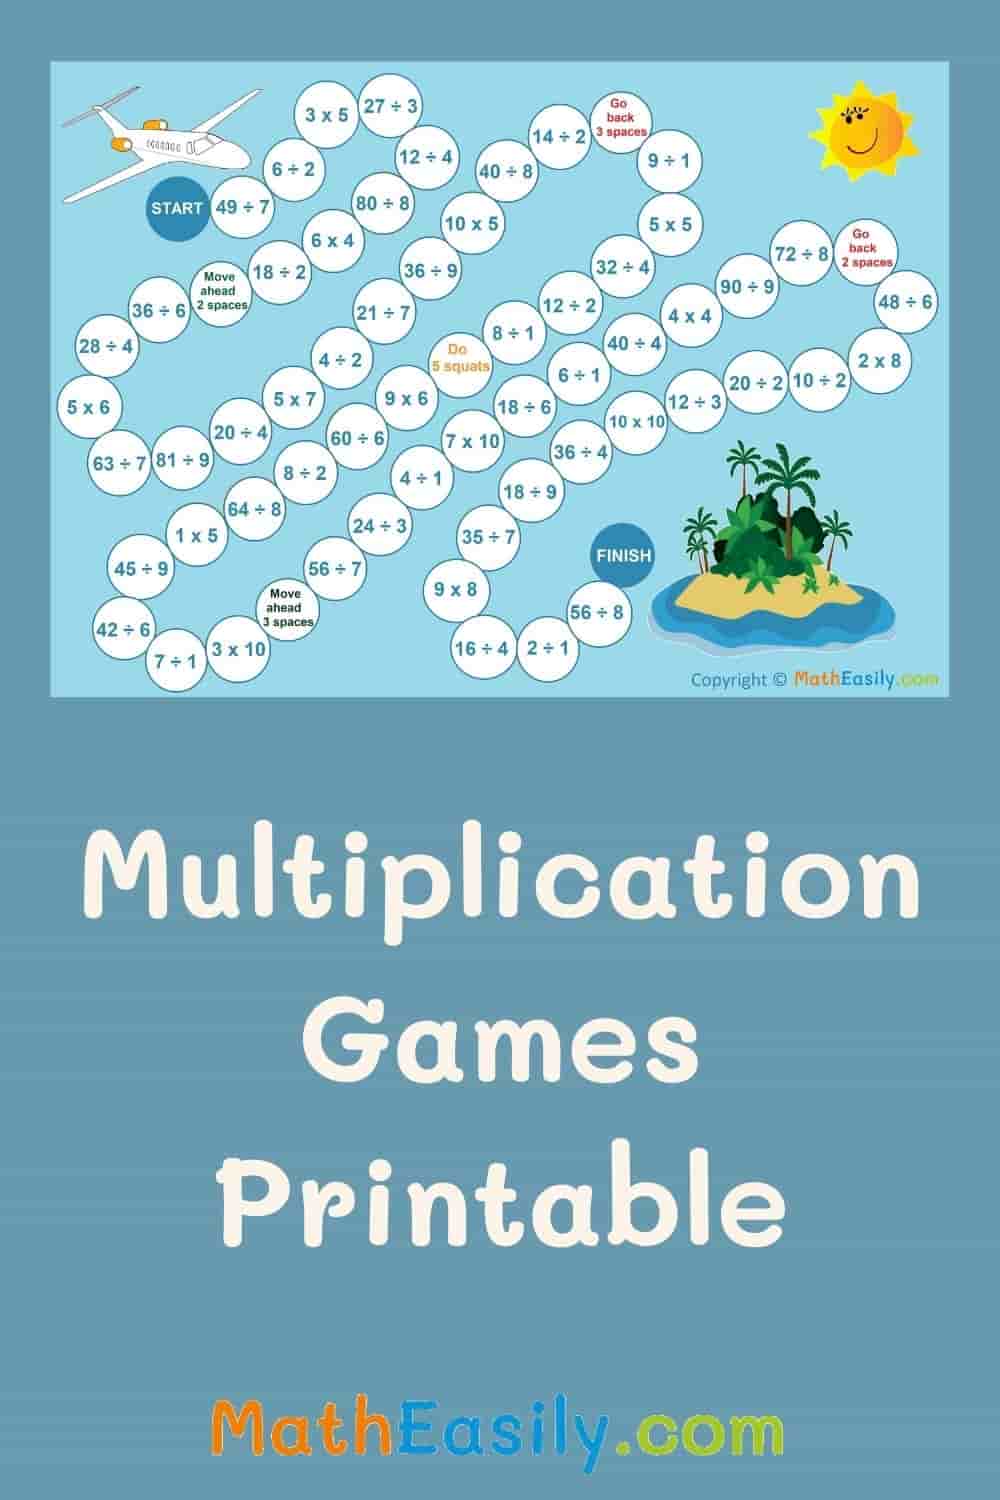 Printable math board games for kids. Ideas for math board games printable.